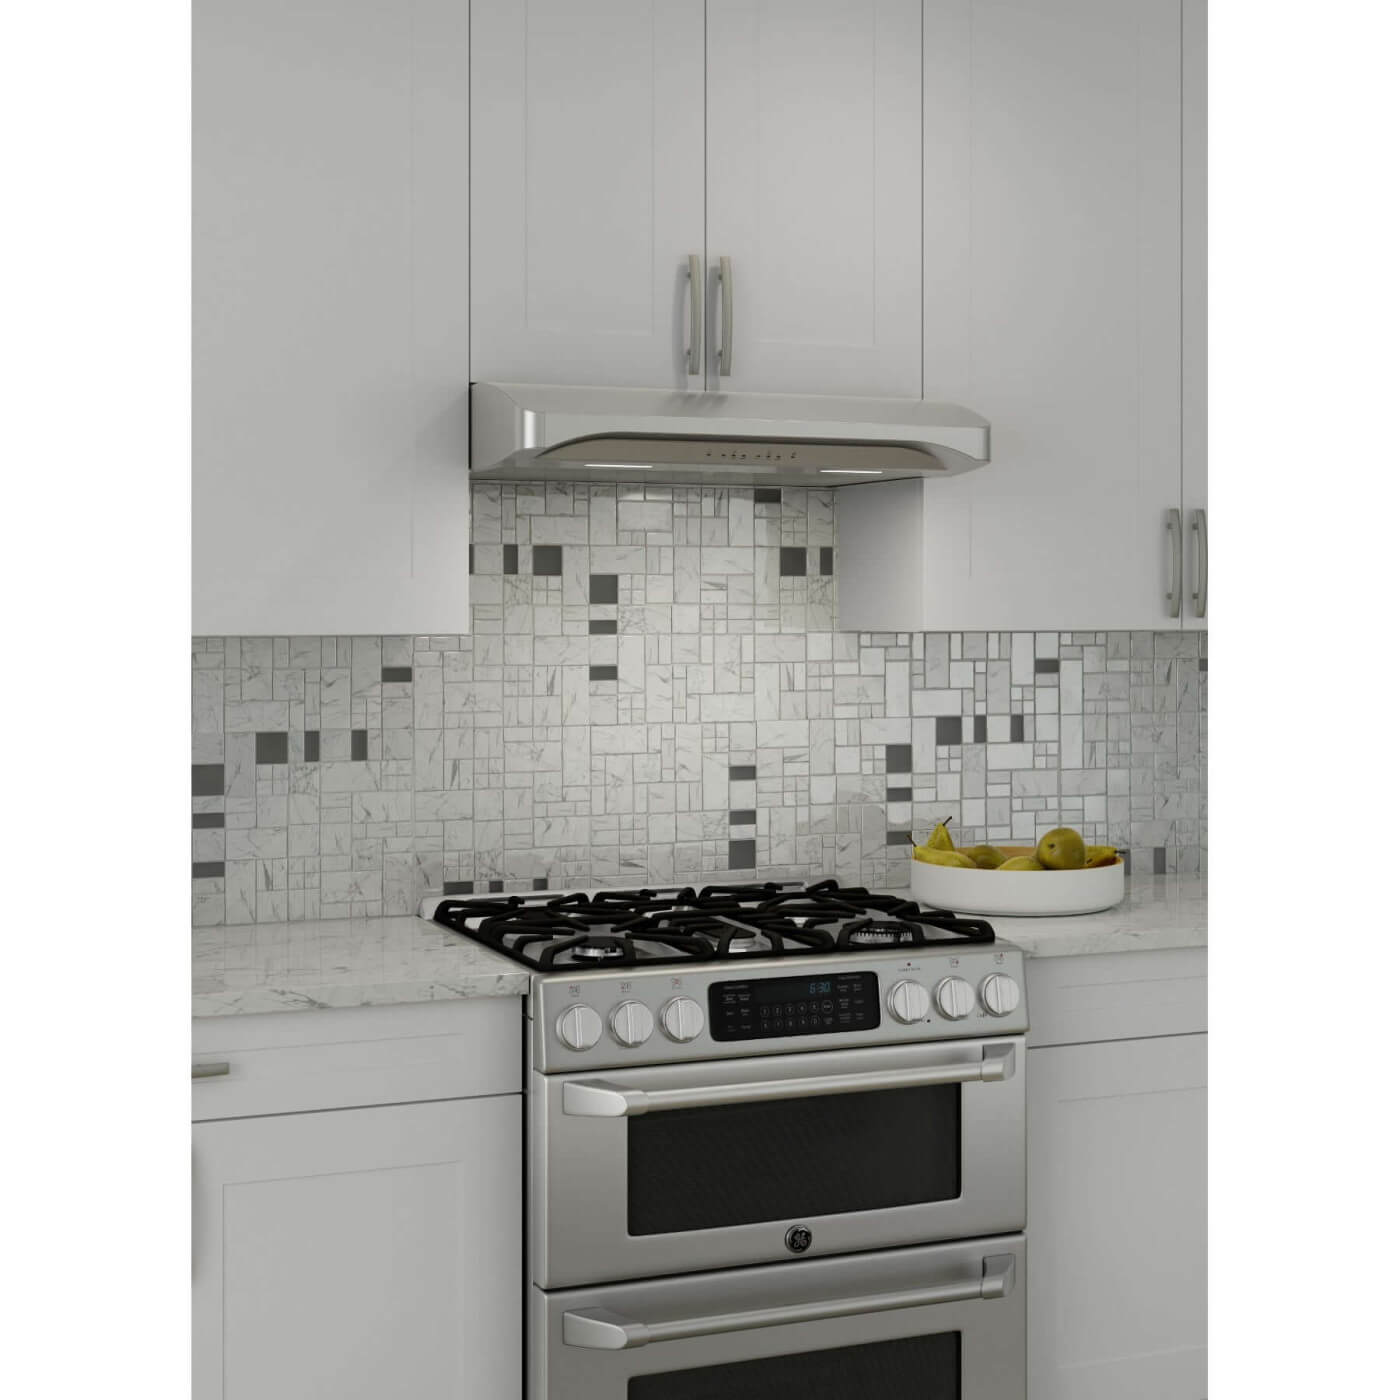 Contemporary kitchen design showcasing a Broan Elite Alta III Series stainless steel convertible under-cabinet range hood, with a geometric tile backsplash and a gas stove. A white bowl of green pears on the countertop adds a splash of color to the monochrome palette